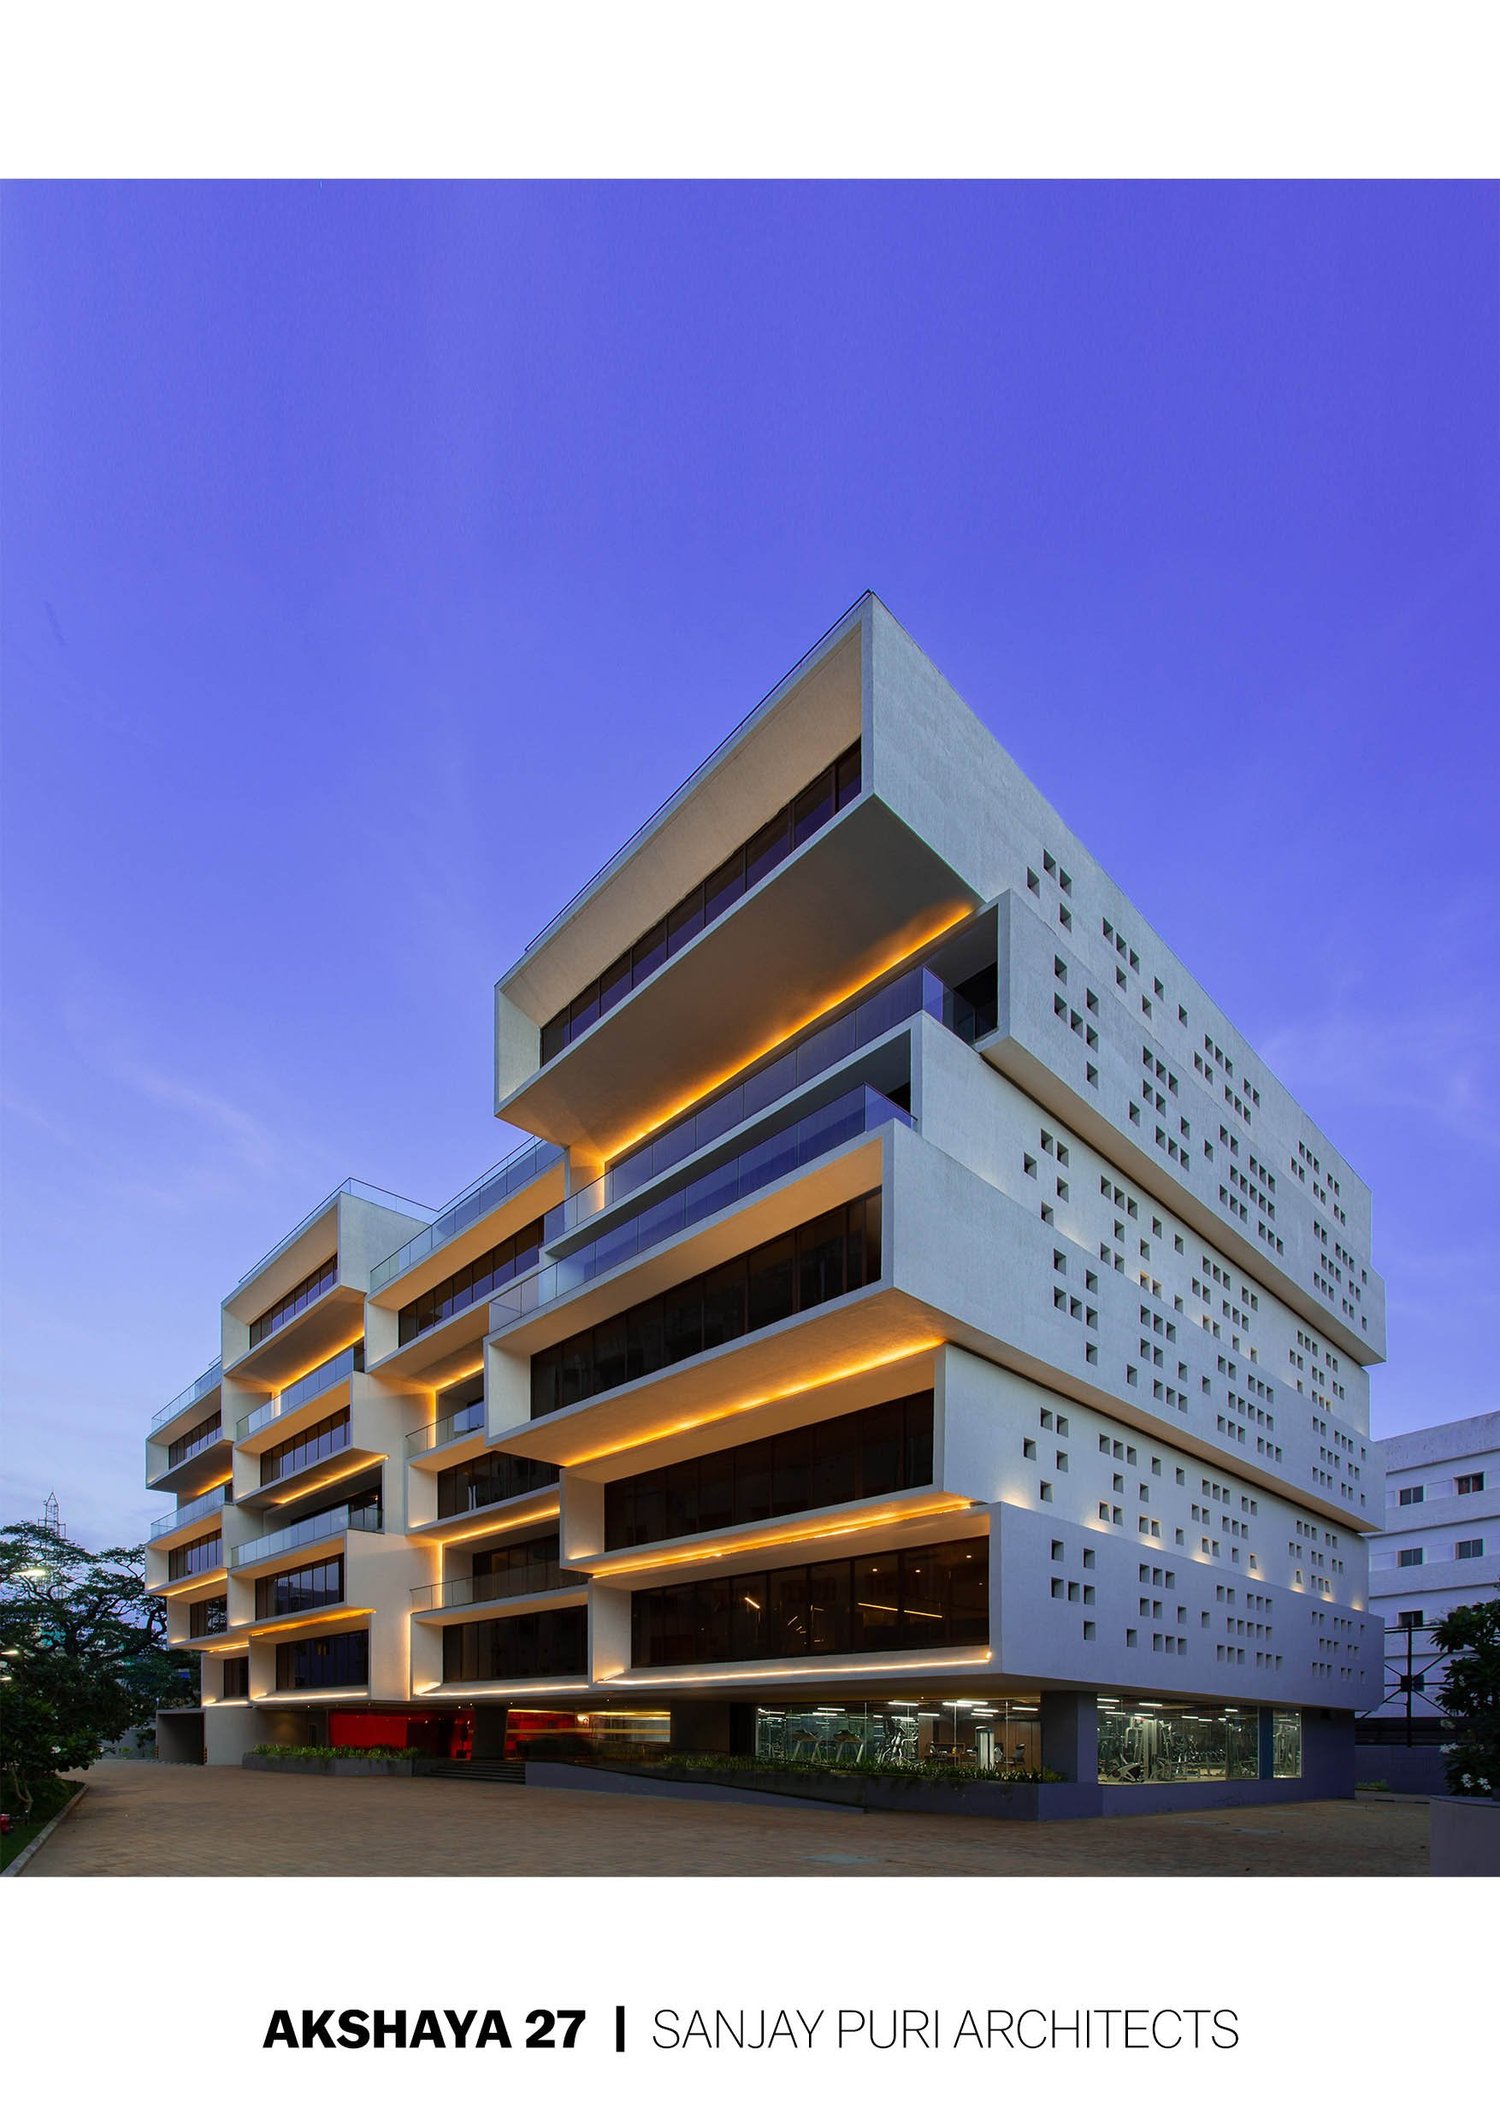 Cuboid cantilevered volumes create an office building with outdoor spaces at each level | BRS Sreenag, Sreenag Pictures